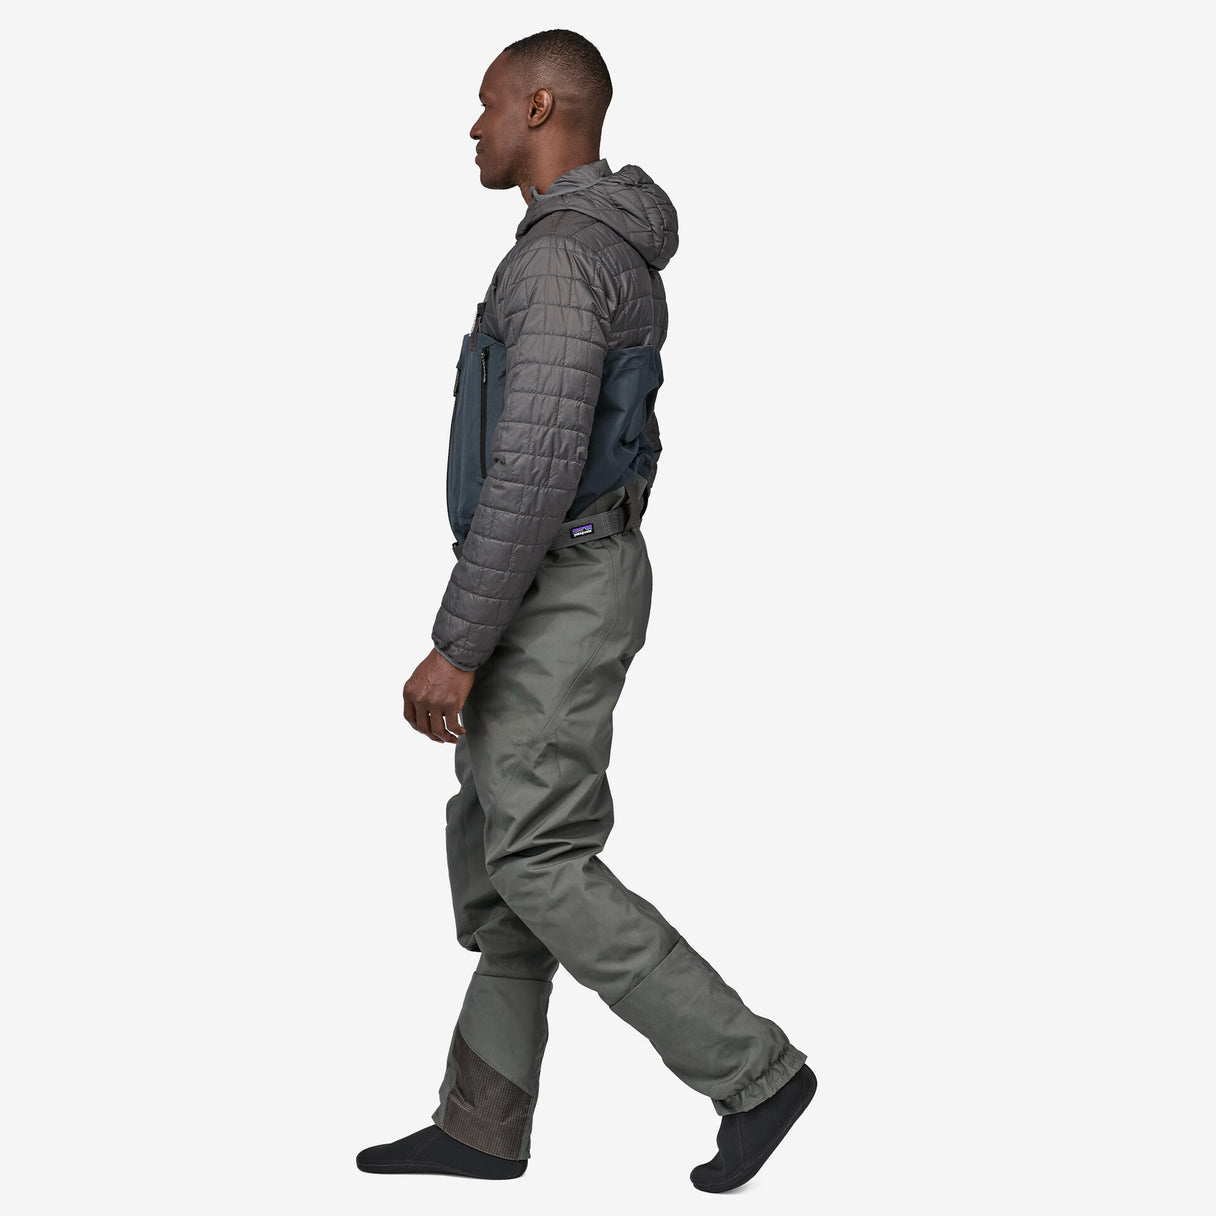 Swiftcurrent Wading Pant - Men's